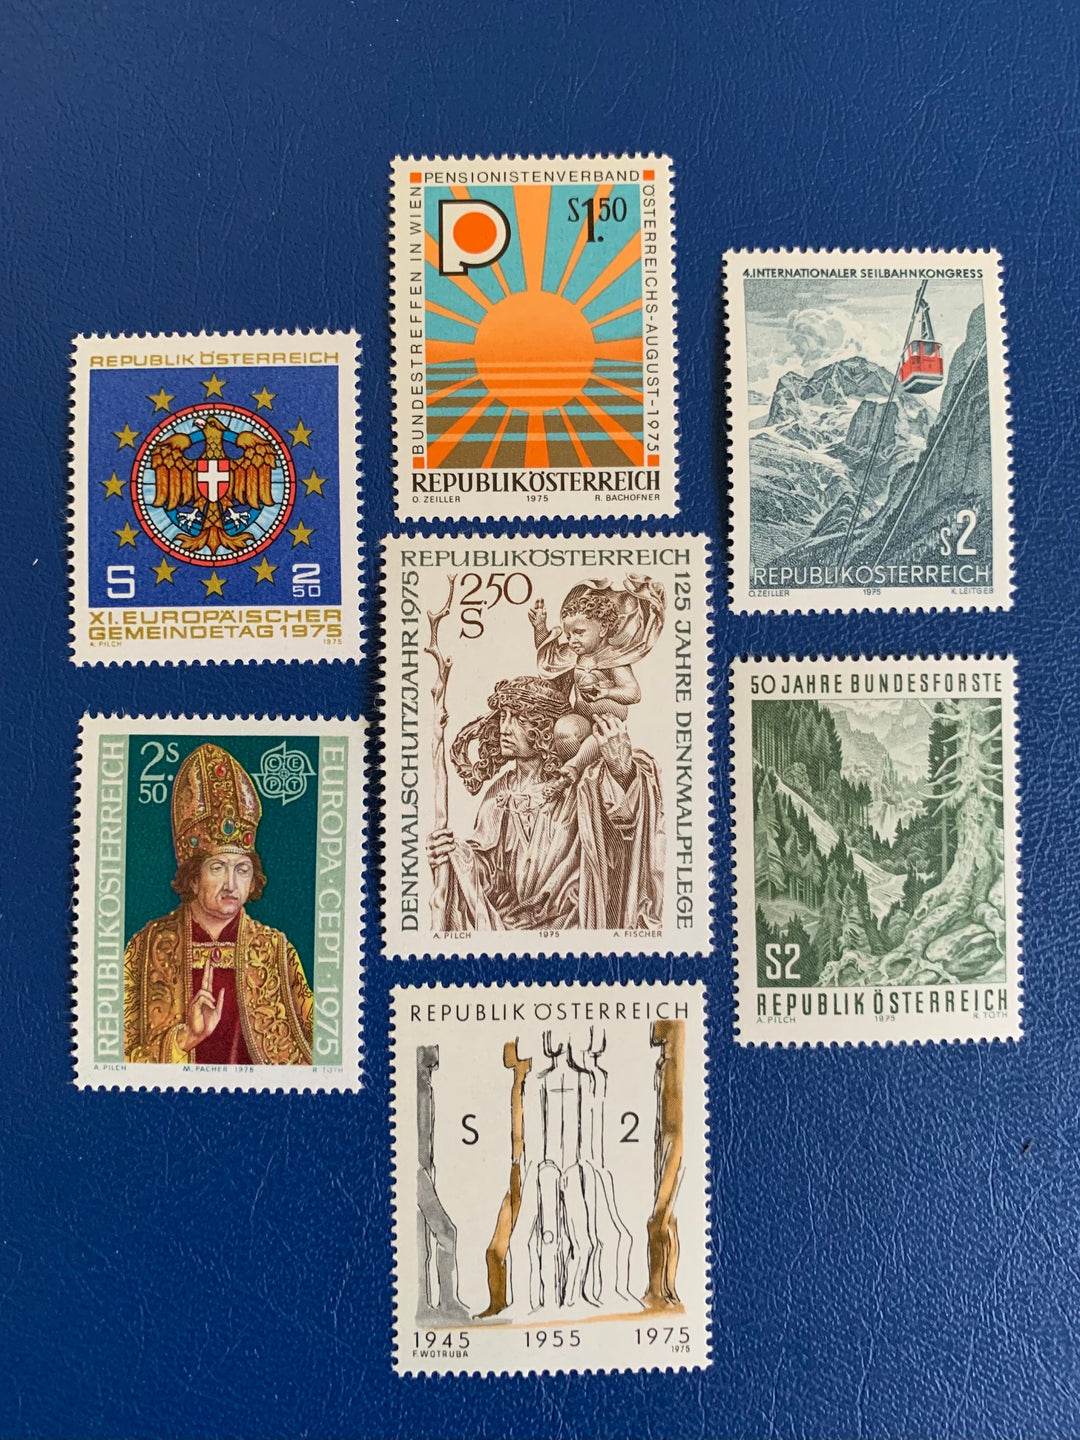 Austria - Original Vintage Postage Stamps - 1975 Mix- for the collector, artist or crafter - scrapbooks, decoupage, journals